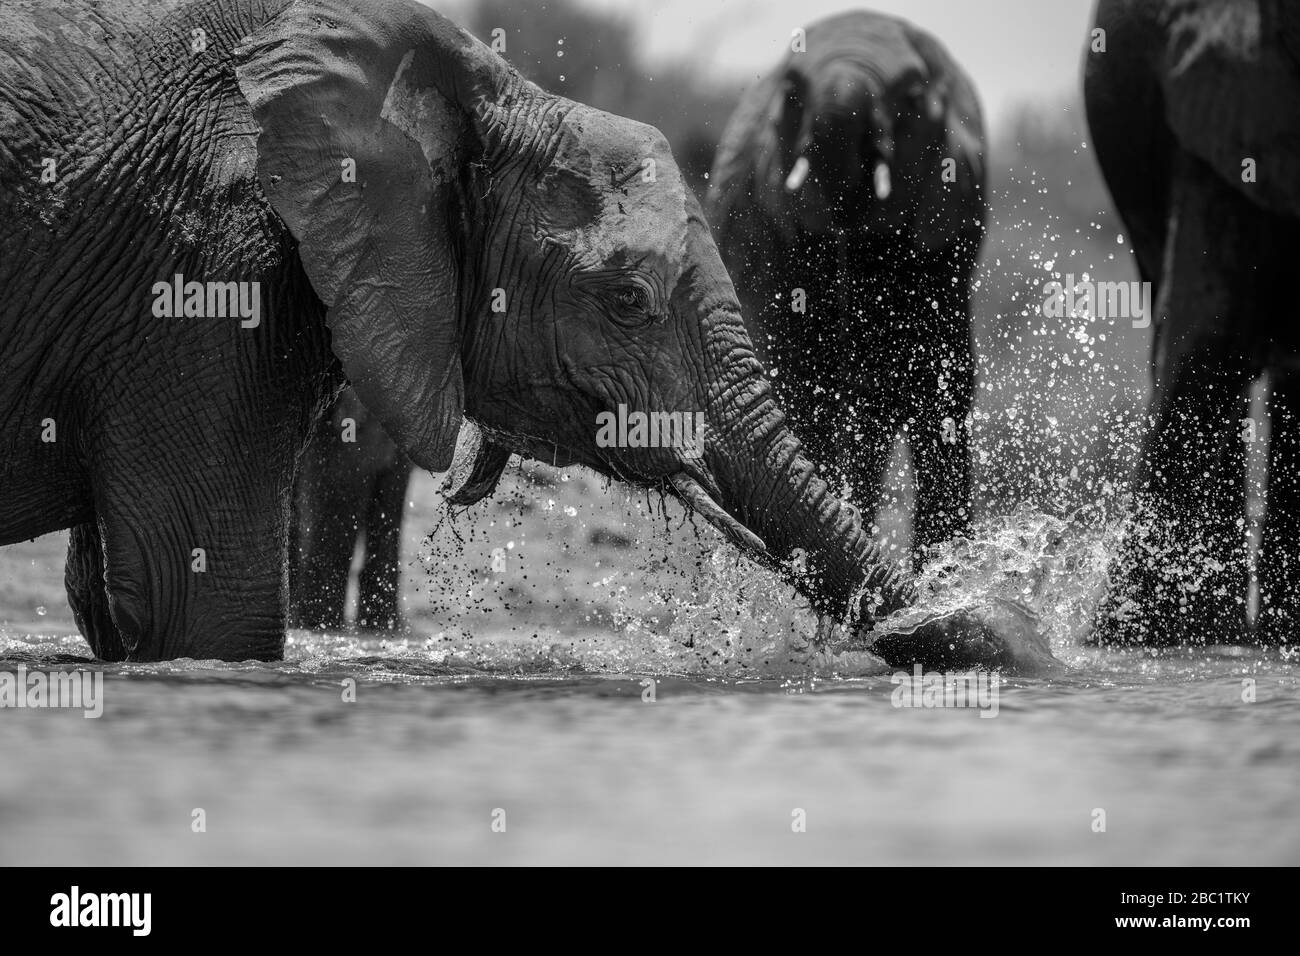 A close up black and white action portrait of a swimming elephant, splashing, playing and drinking in a waterhole at the Madikwe Game Reserve, South A Stock Photo